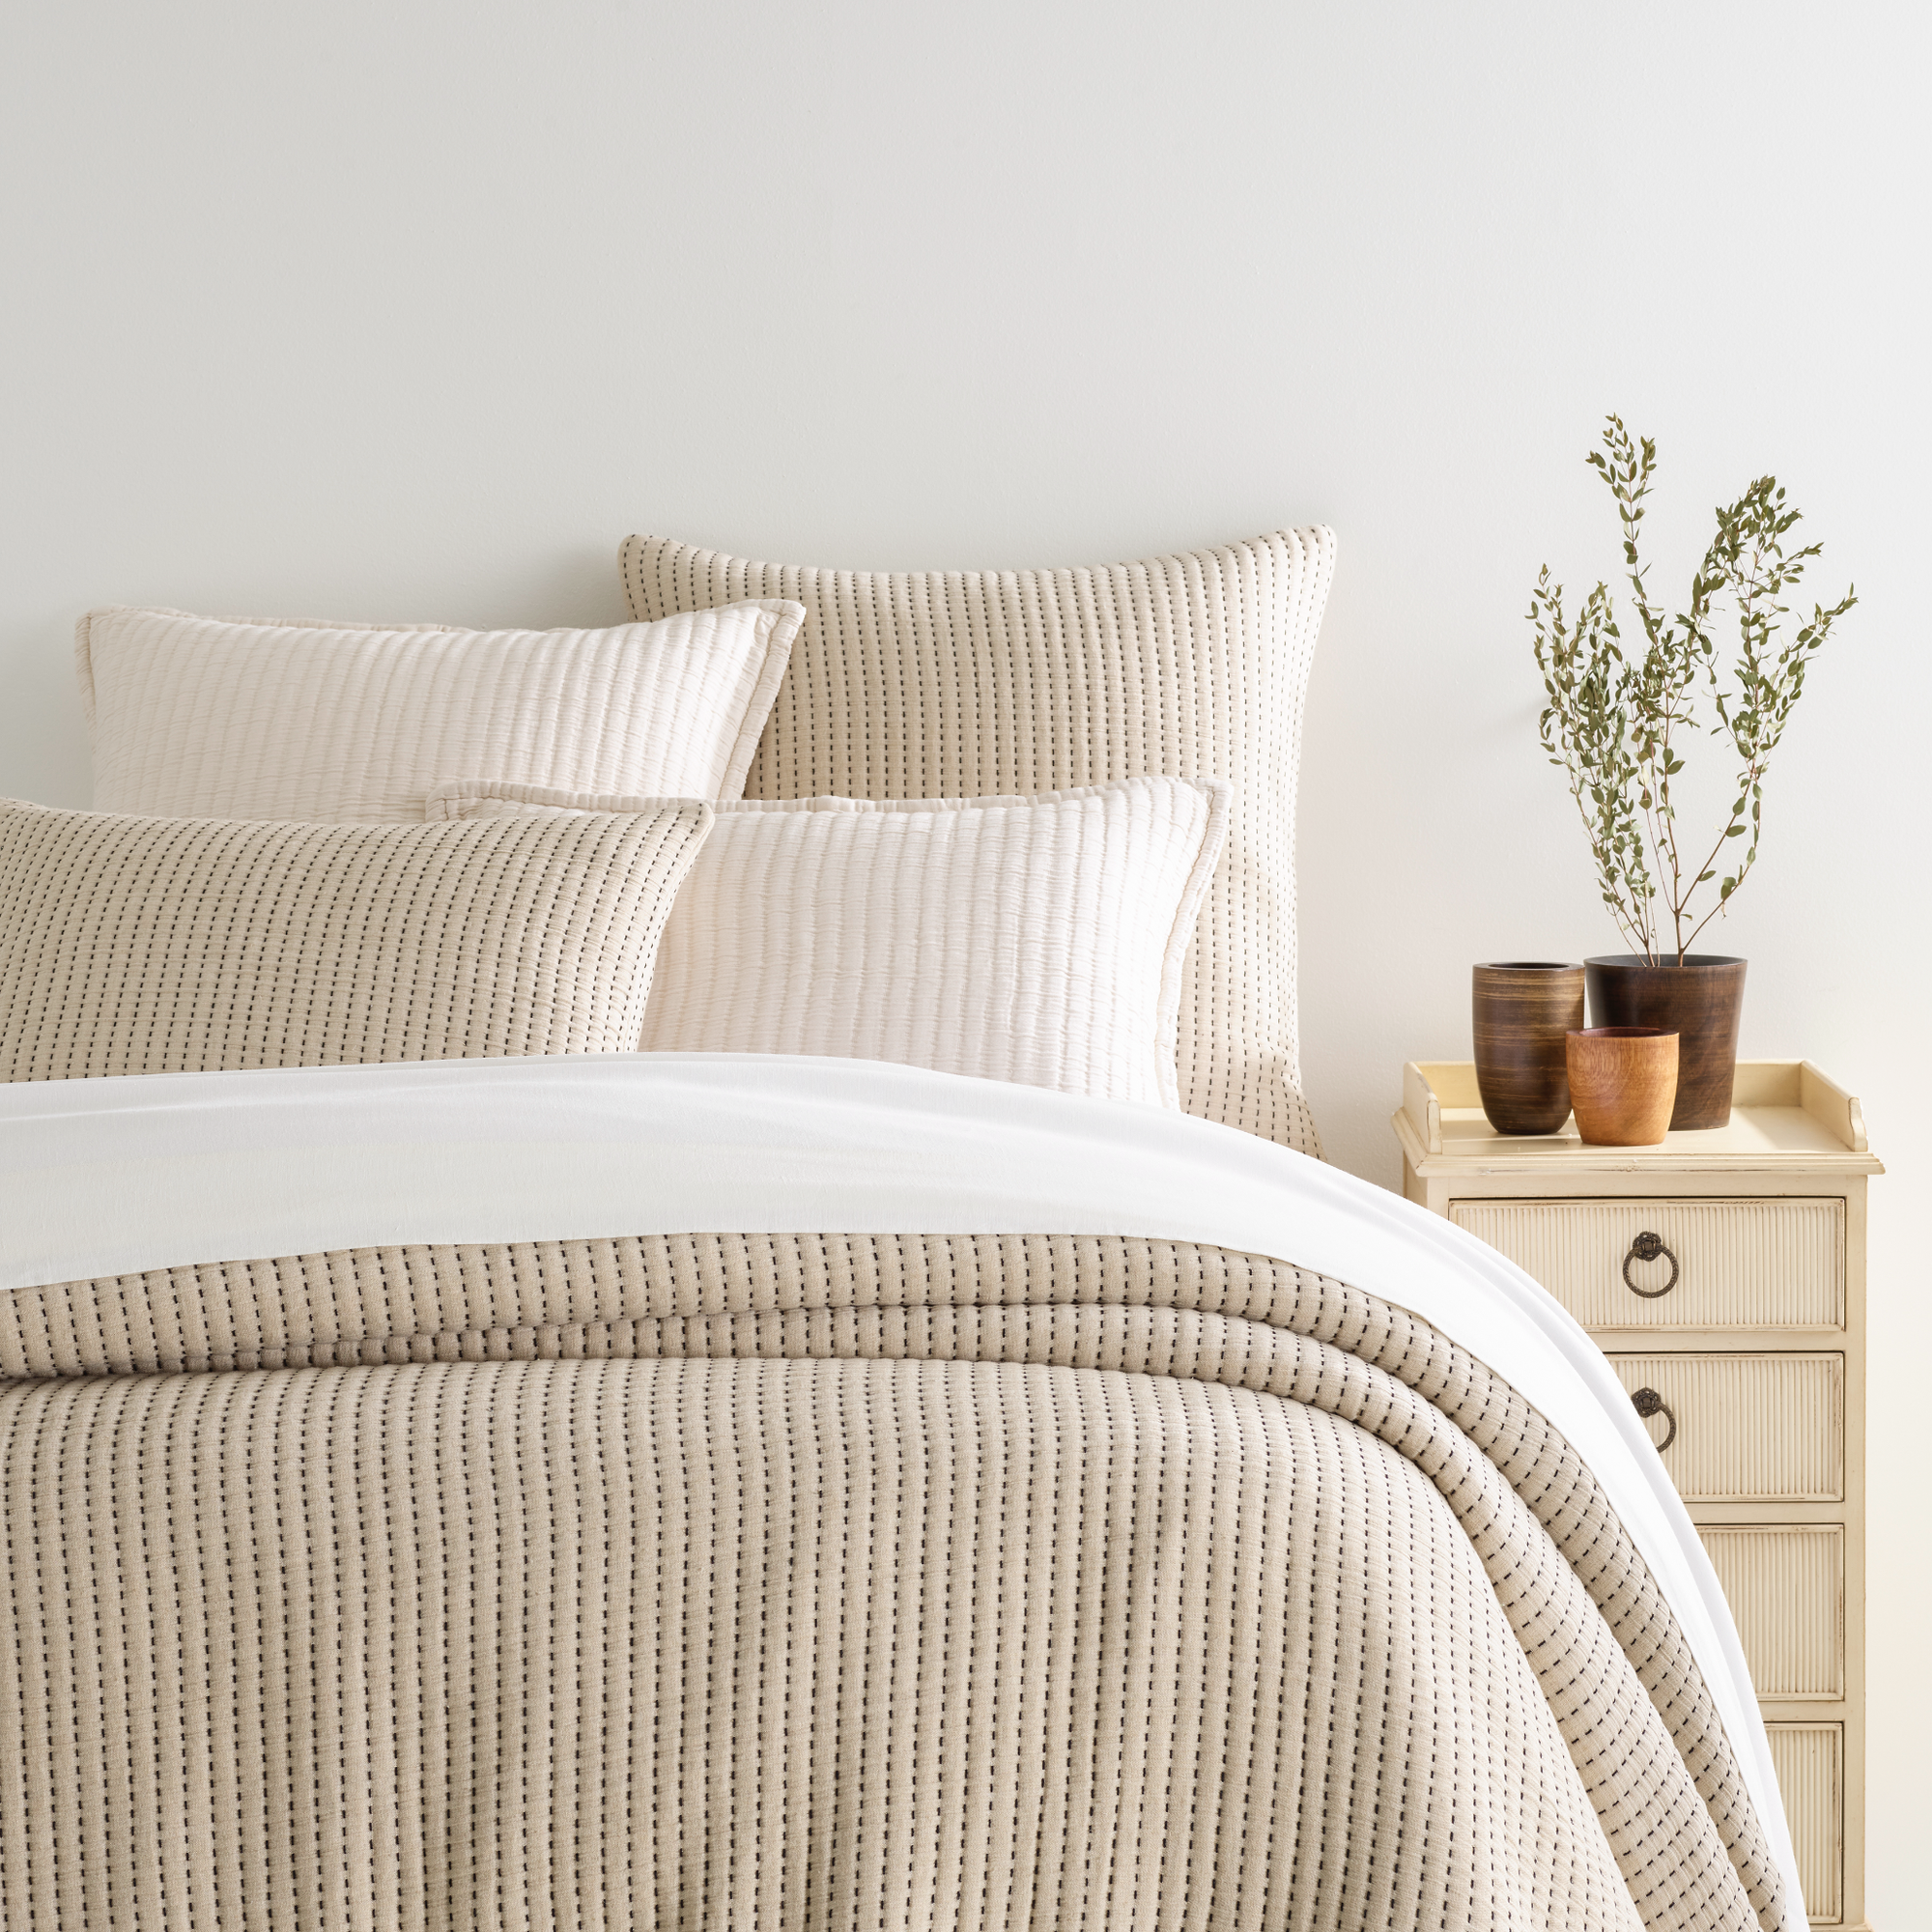 Bed Dressed in Natural Pine Cone Hill Pick Stitch Matelassé Coverlet & Shams